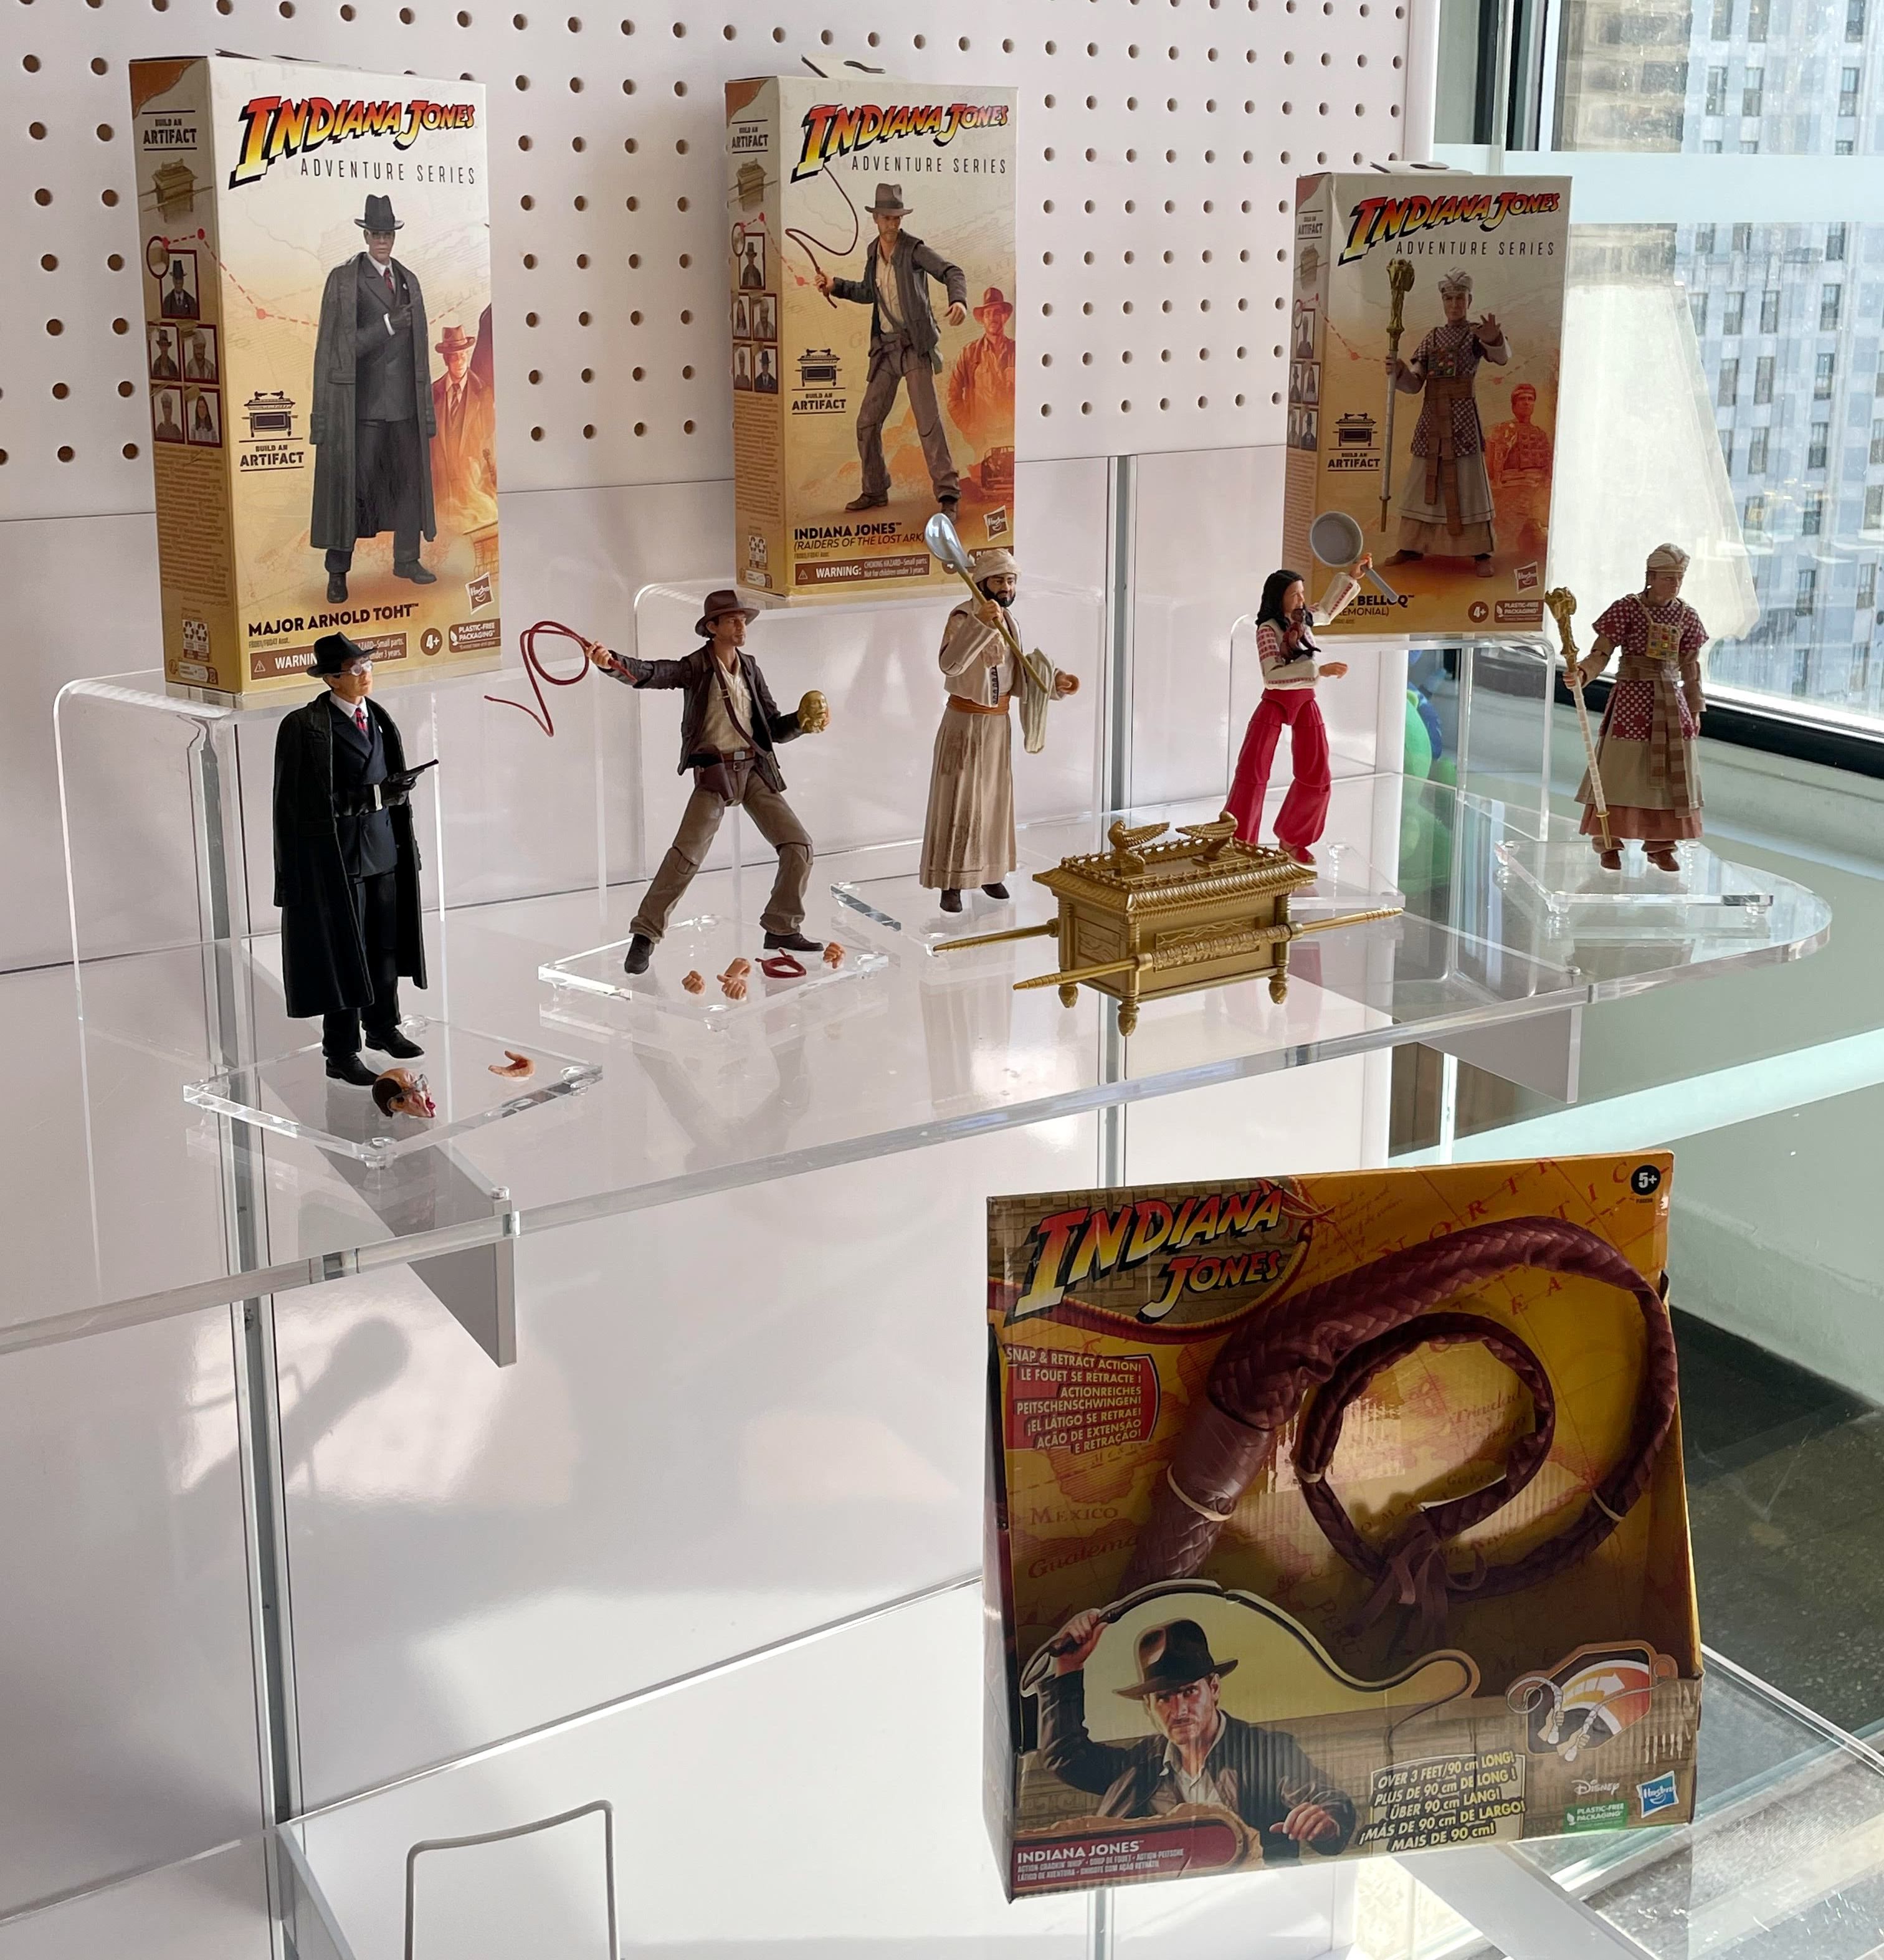 Indiana Jones Adventure Series and Whip toy.